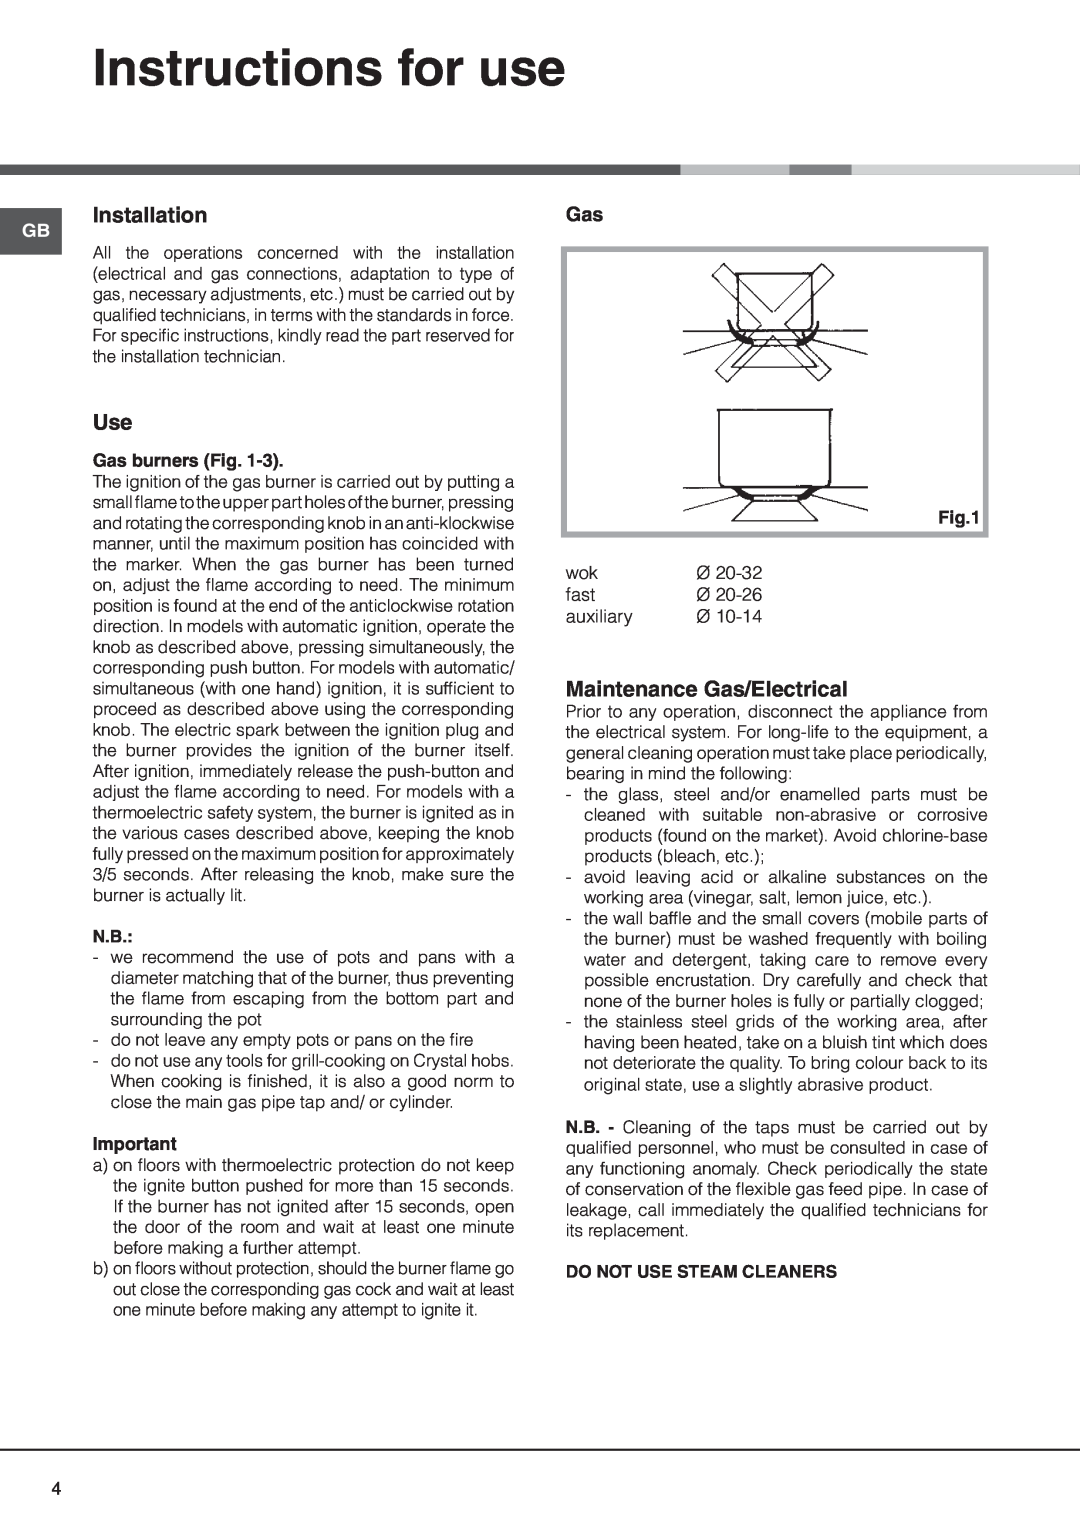 Hotpoint G320GIX, G3201LIX manual Instructions for use, Installation, Maintenance Gas/Electrical, Gas burners Fig 